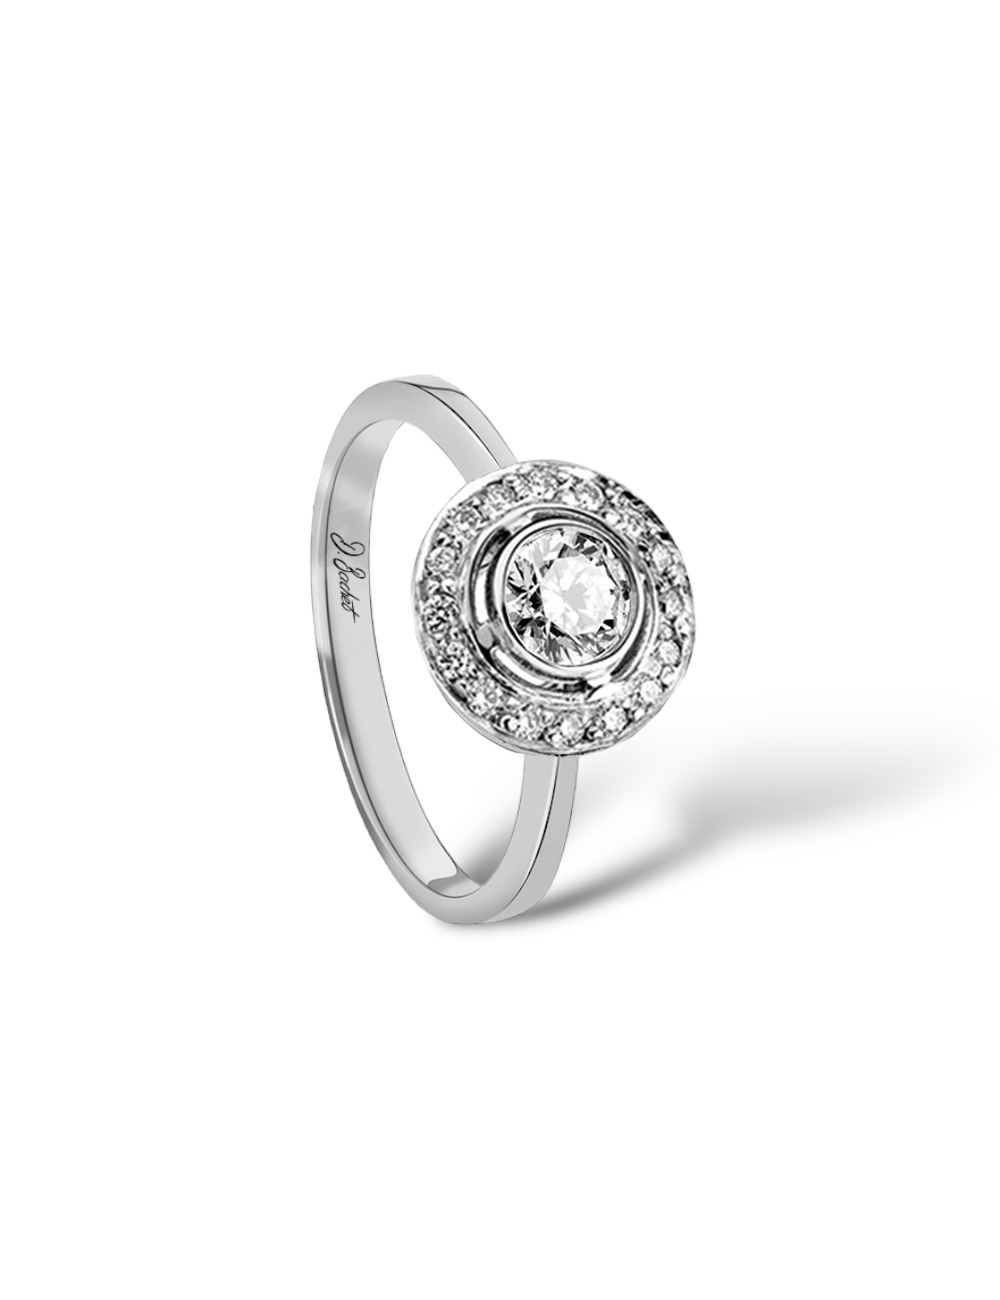 Platinum 'About the Love' engagement ring with central diamond and surrounding diamond halo.